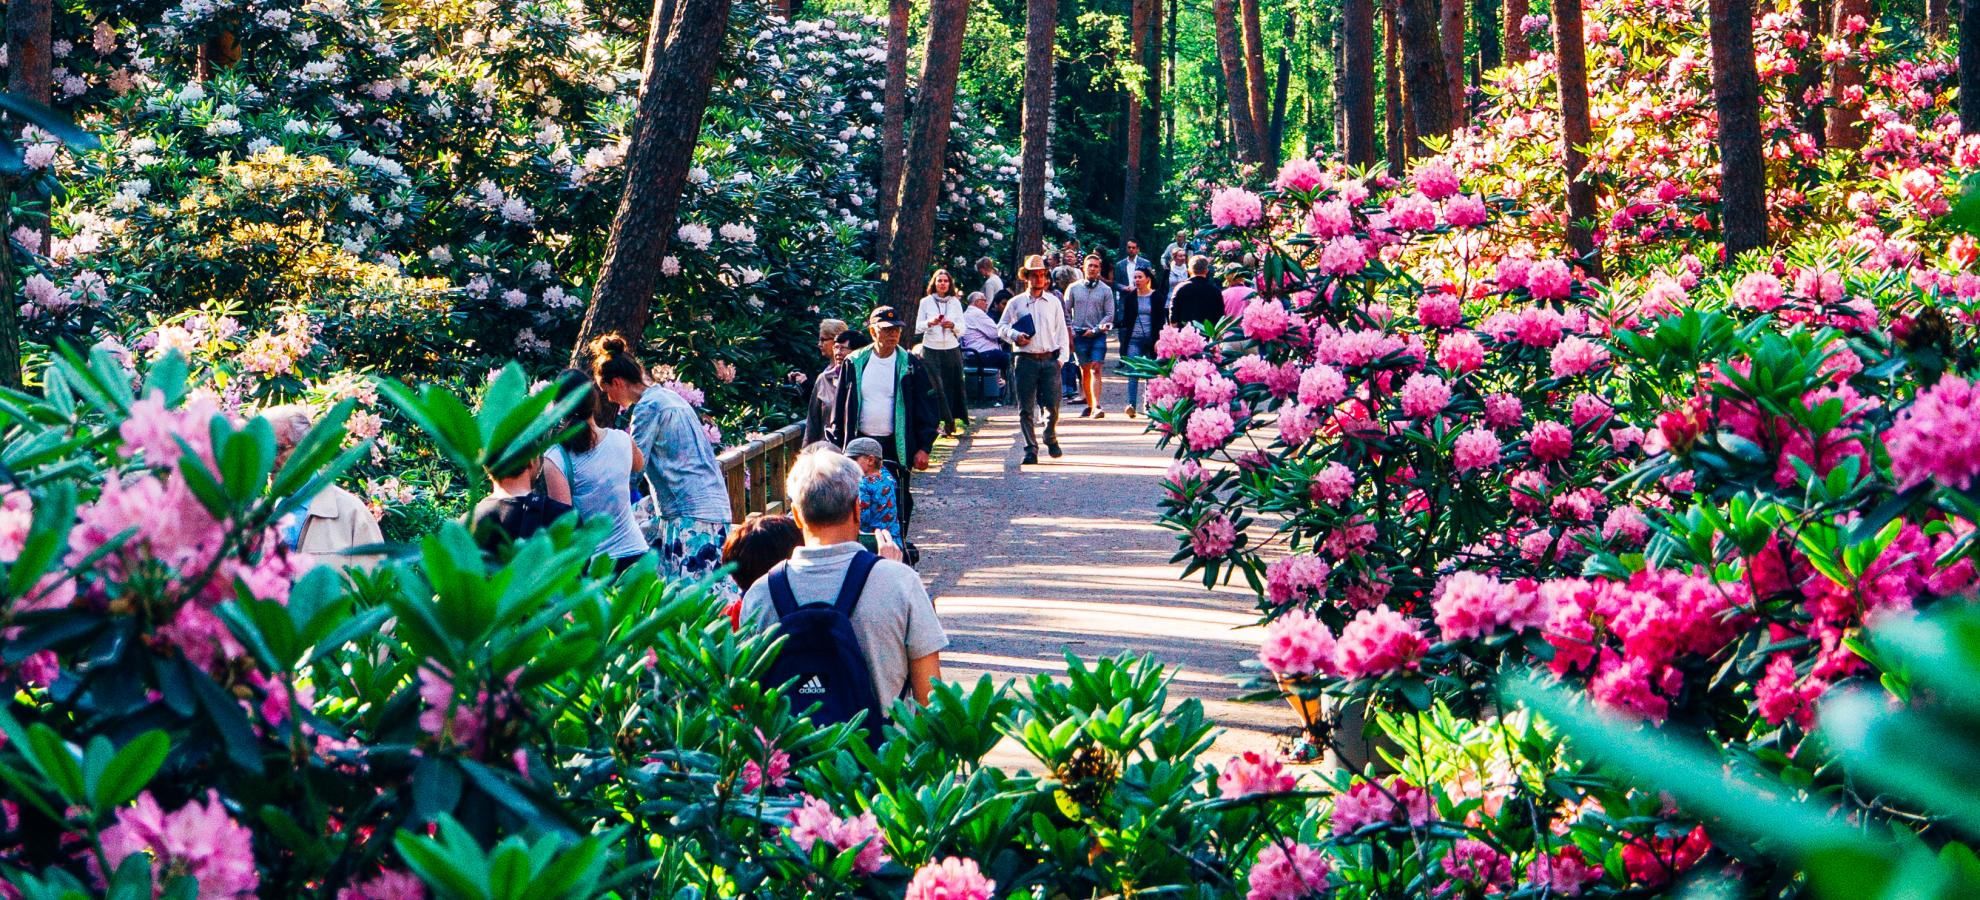 Portrait orientation. At the Rhododendron Park, a path surrounded by large bushes full of pink flowers leads into the distance with spruce trees stretching many metres high. Small groups of people are walking, admiring the flowers.